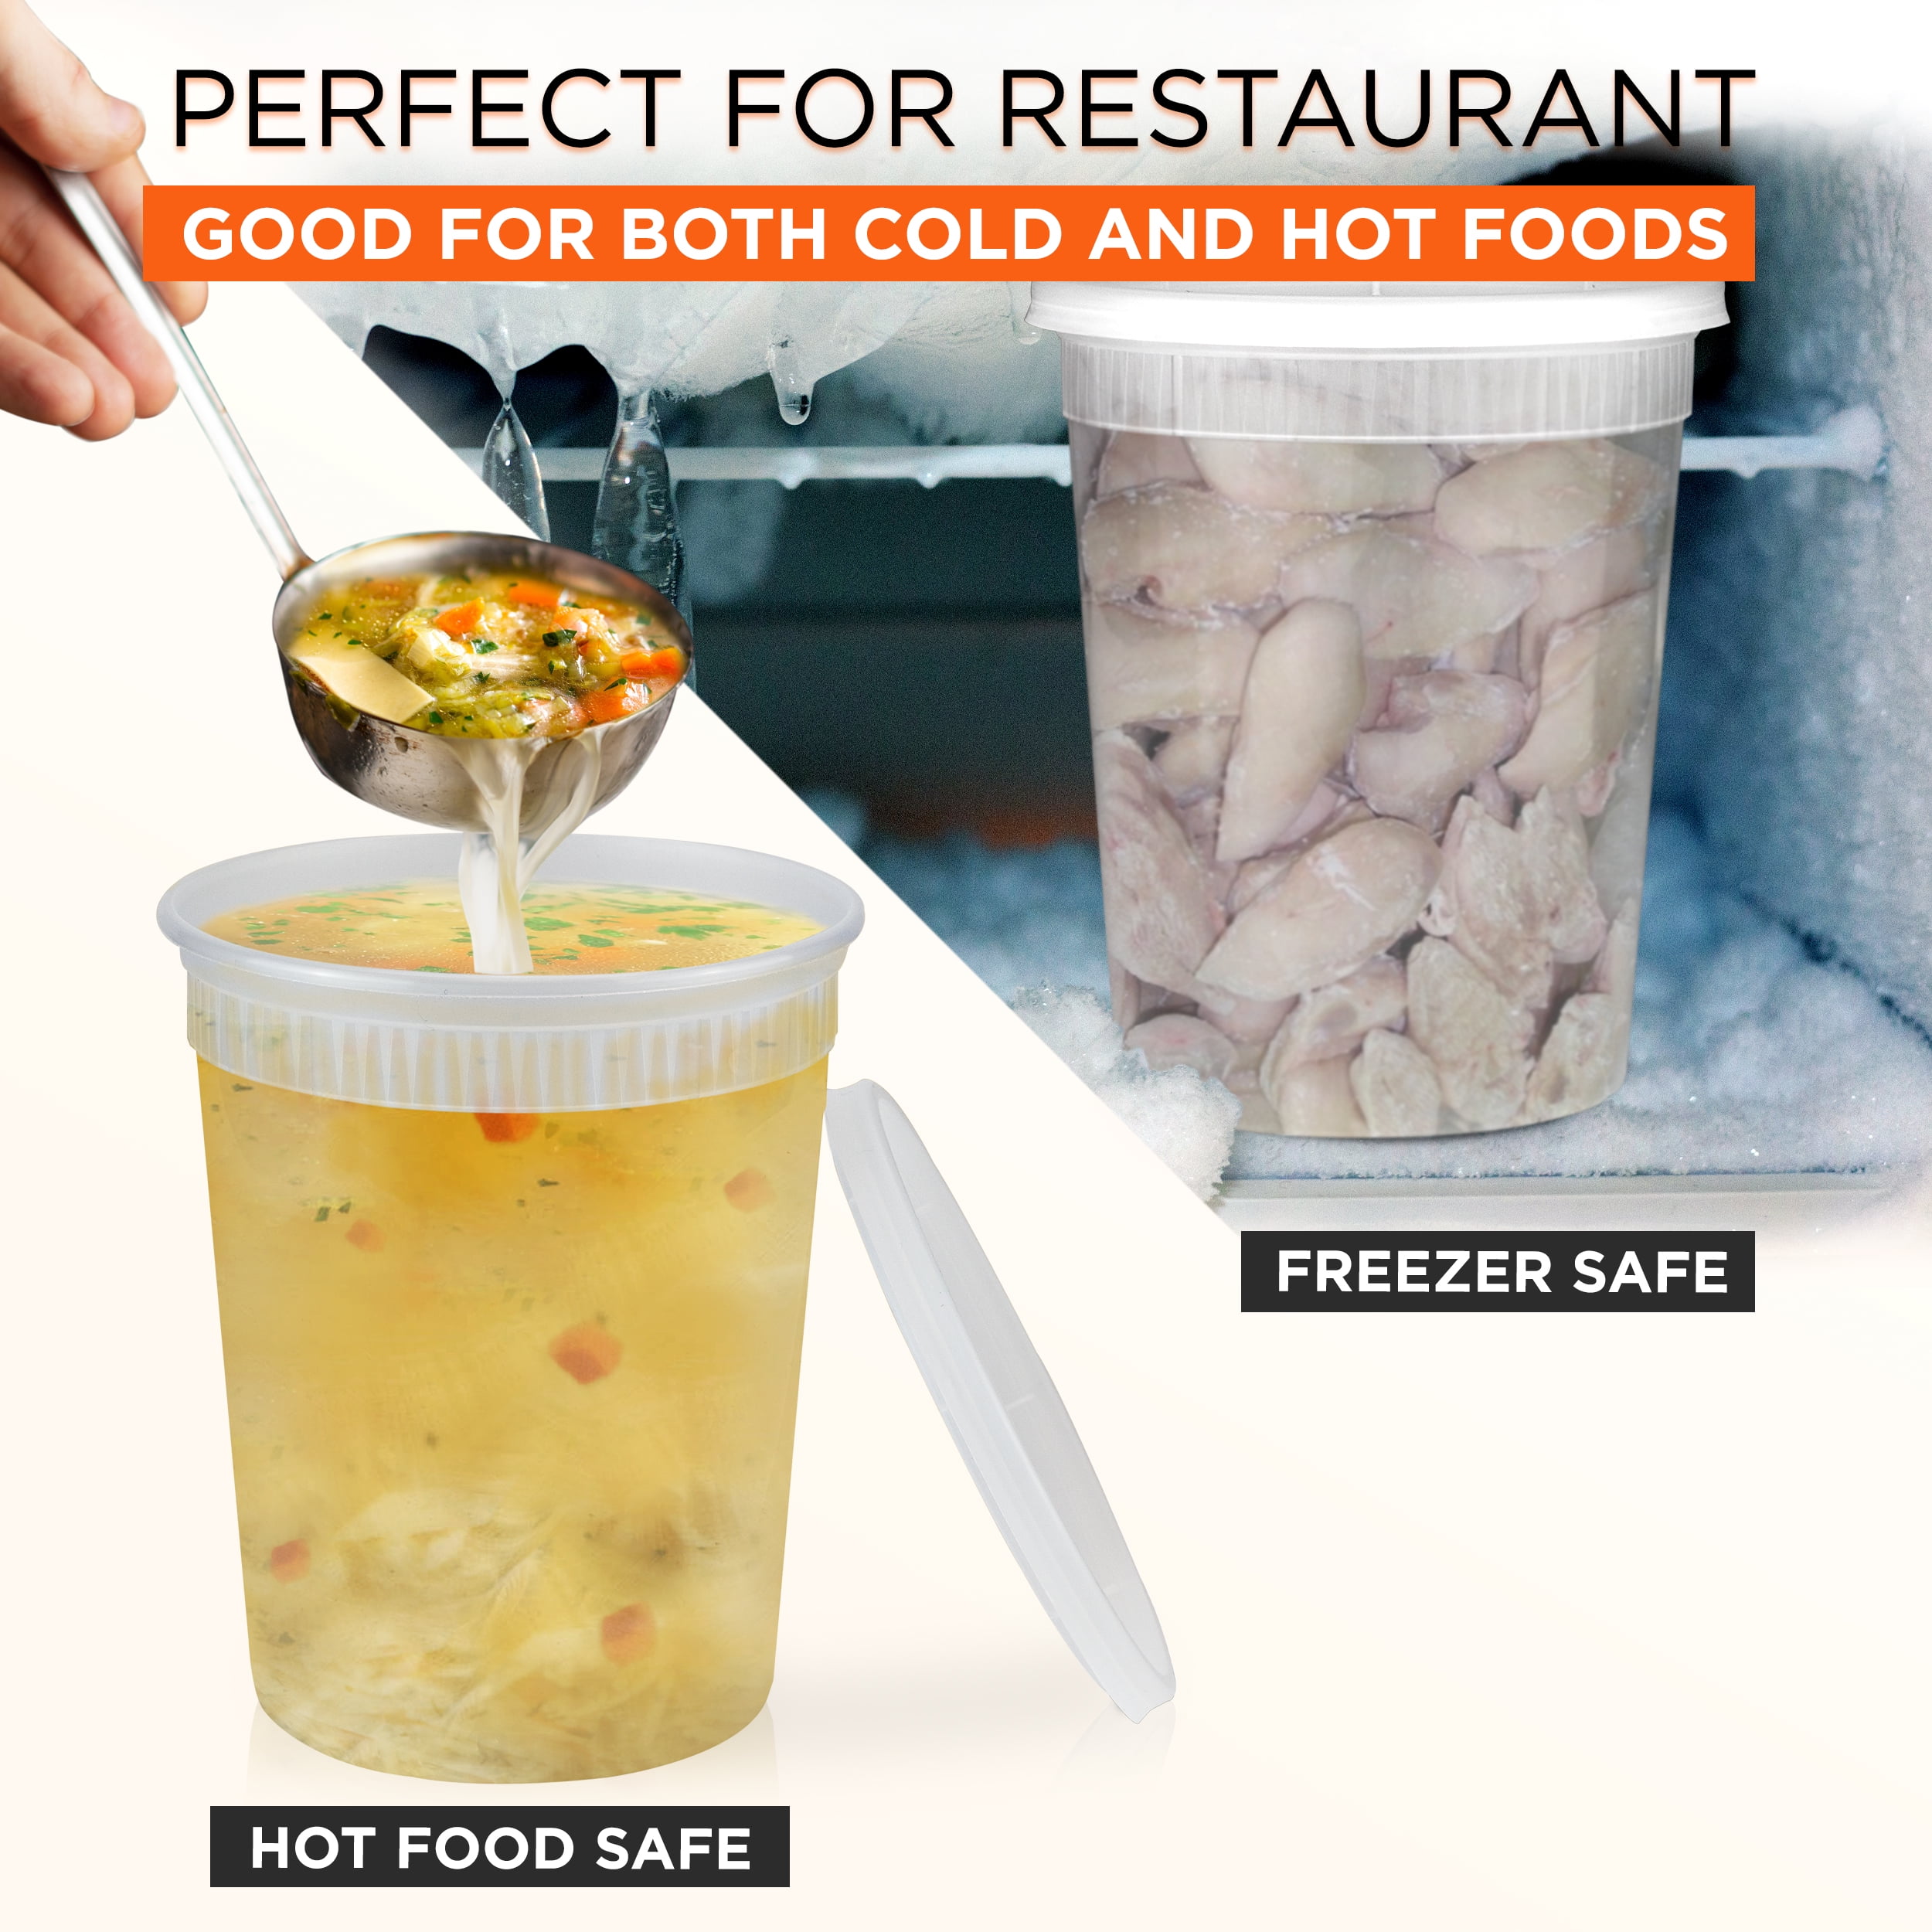 32 oz Premium Deli Containers with Lids. Plastic Quart Containers with  Lids, Soup Containers | Freezer, Microwave and Dishwasher Safe (24 Pack)